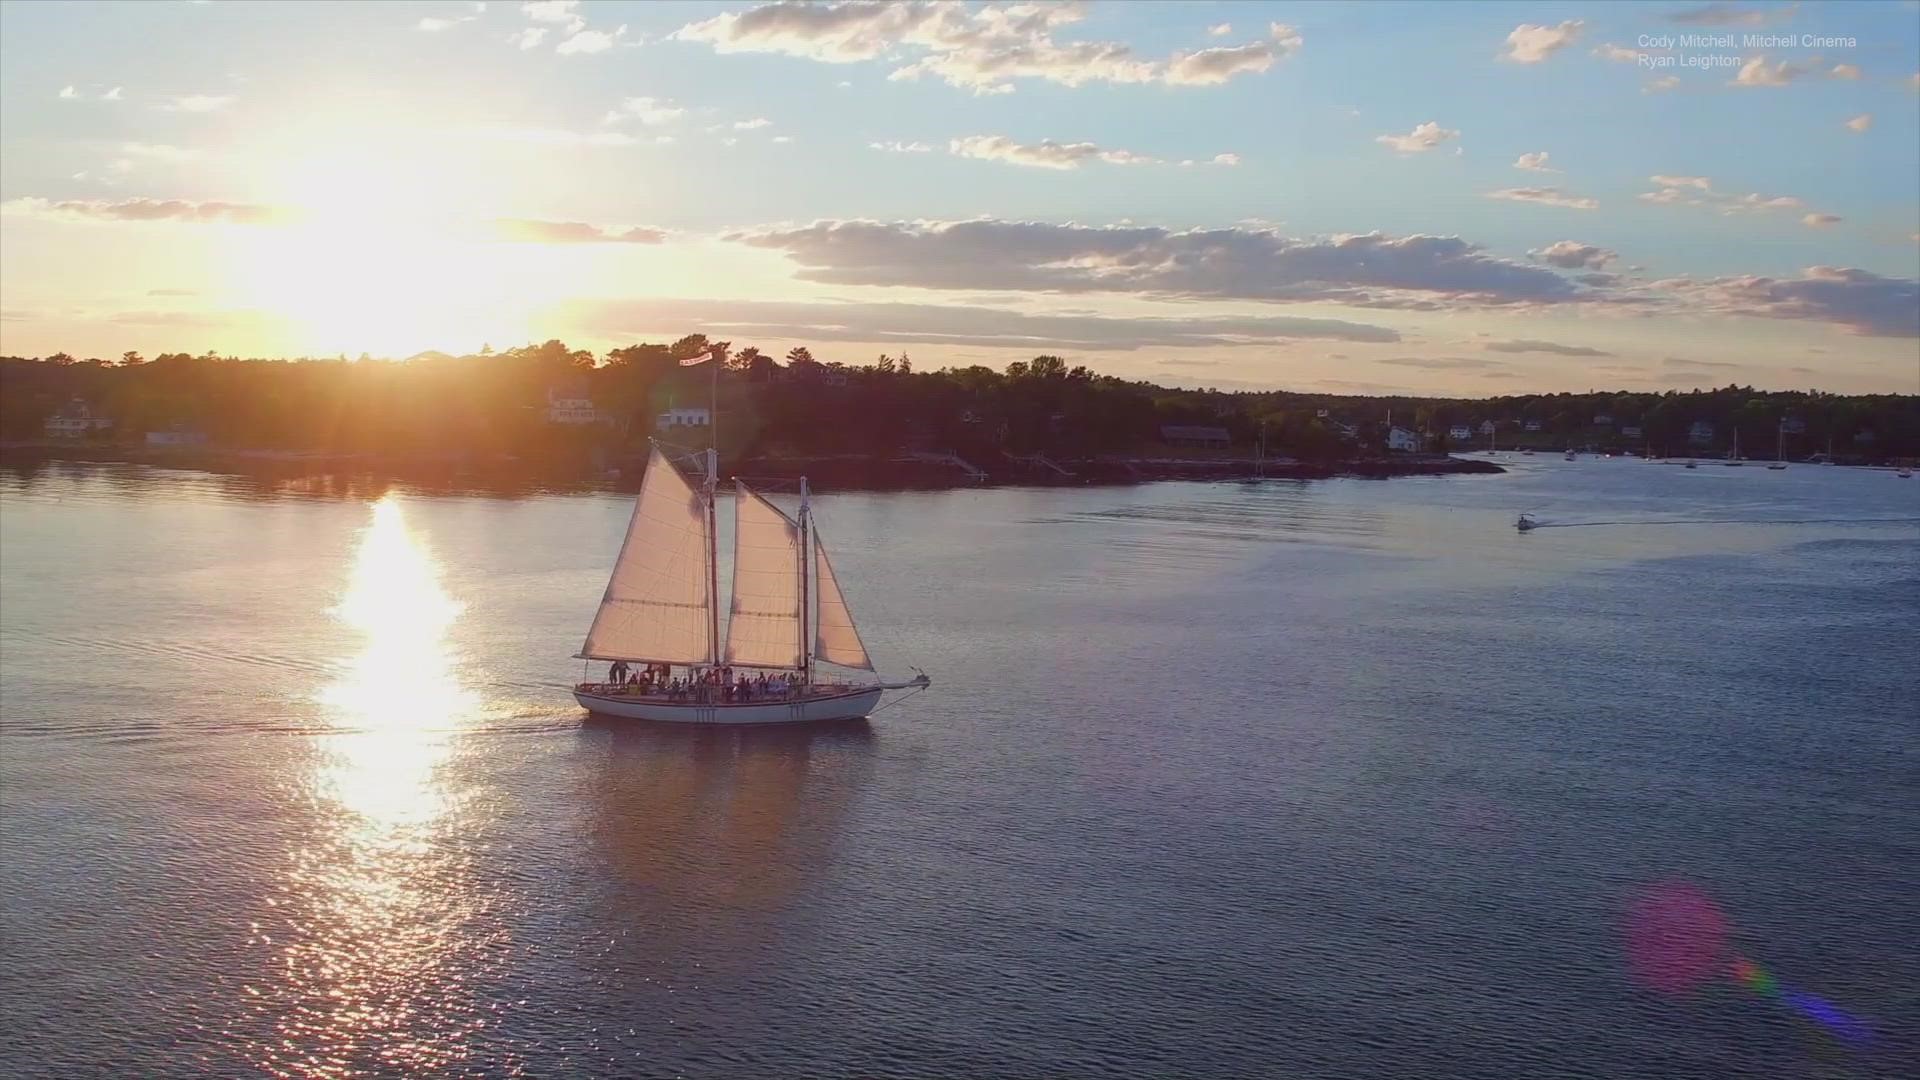 Honor  maritime history and celebrate the vital role it plays in the lives of all who live in the Boothbay region. Join the festivities June 26 - July 2.